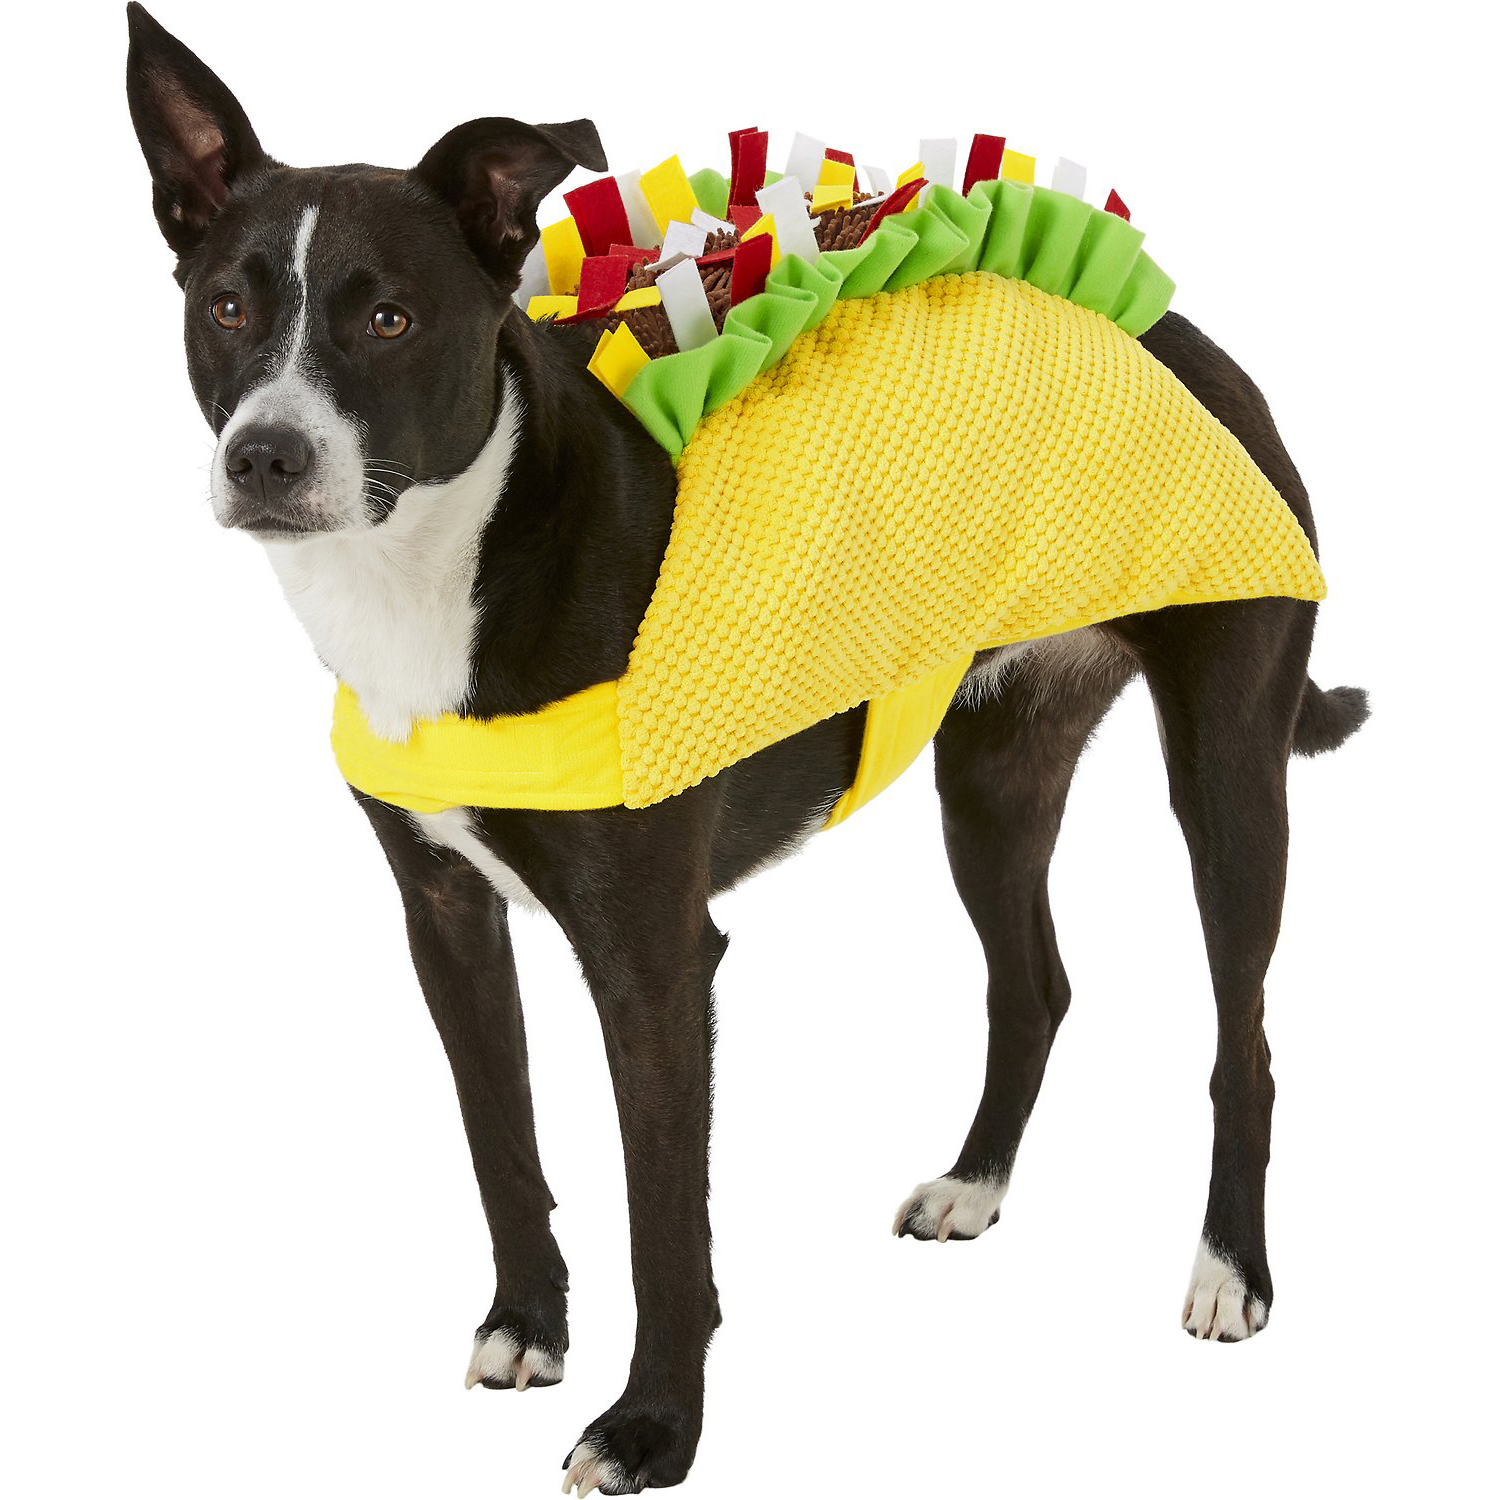 17 Funny + Cute Dog Halloween Costumes We Love for 2021 (+ Picks for Cats,  Too!)